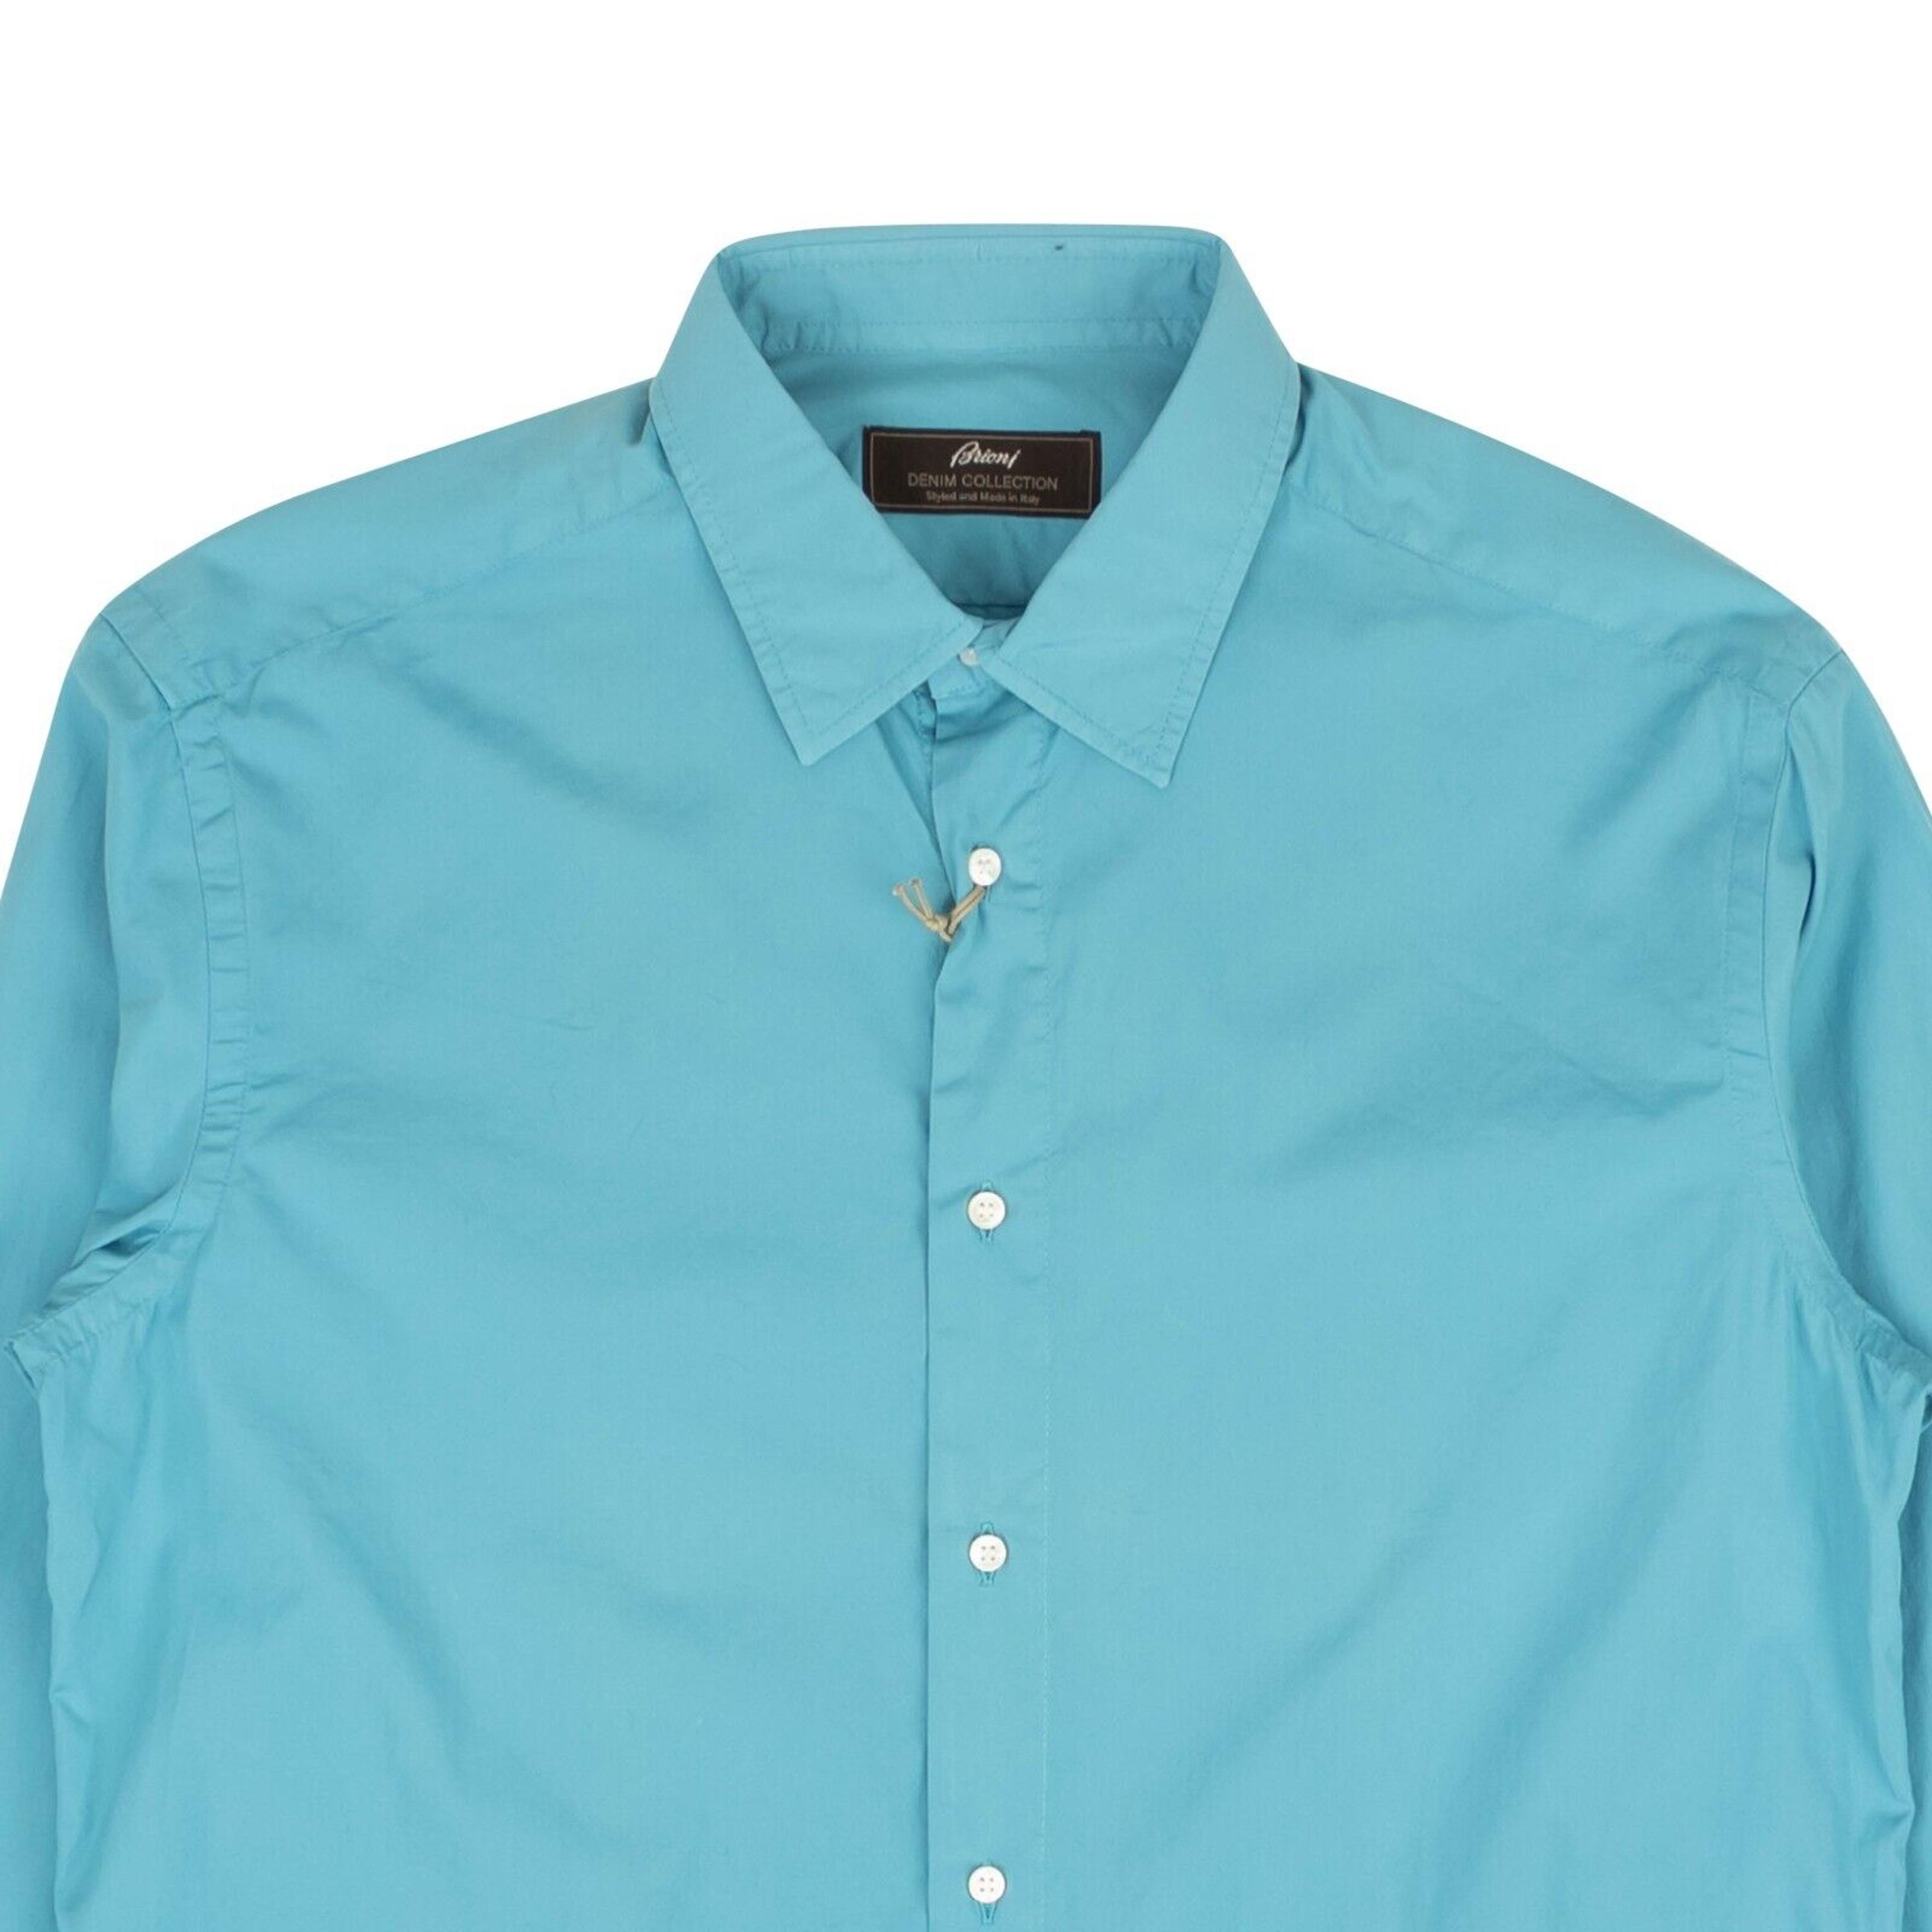 Alternate View 1 of Teal Blue Slim-Fit Long Sleeve Cotton Casual Shirt